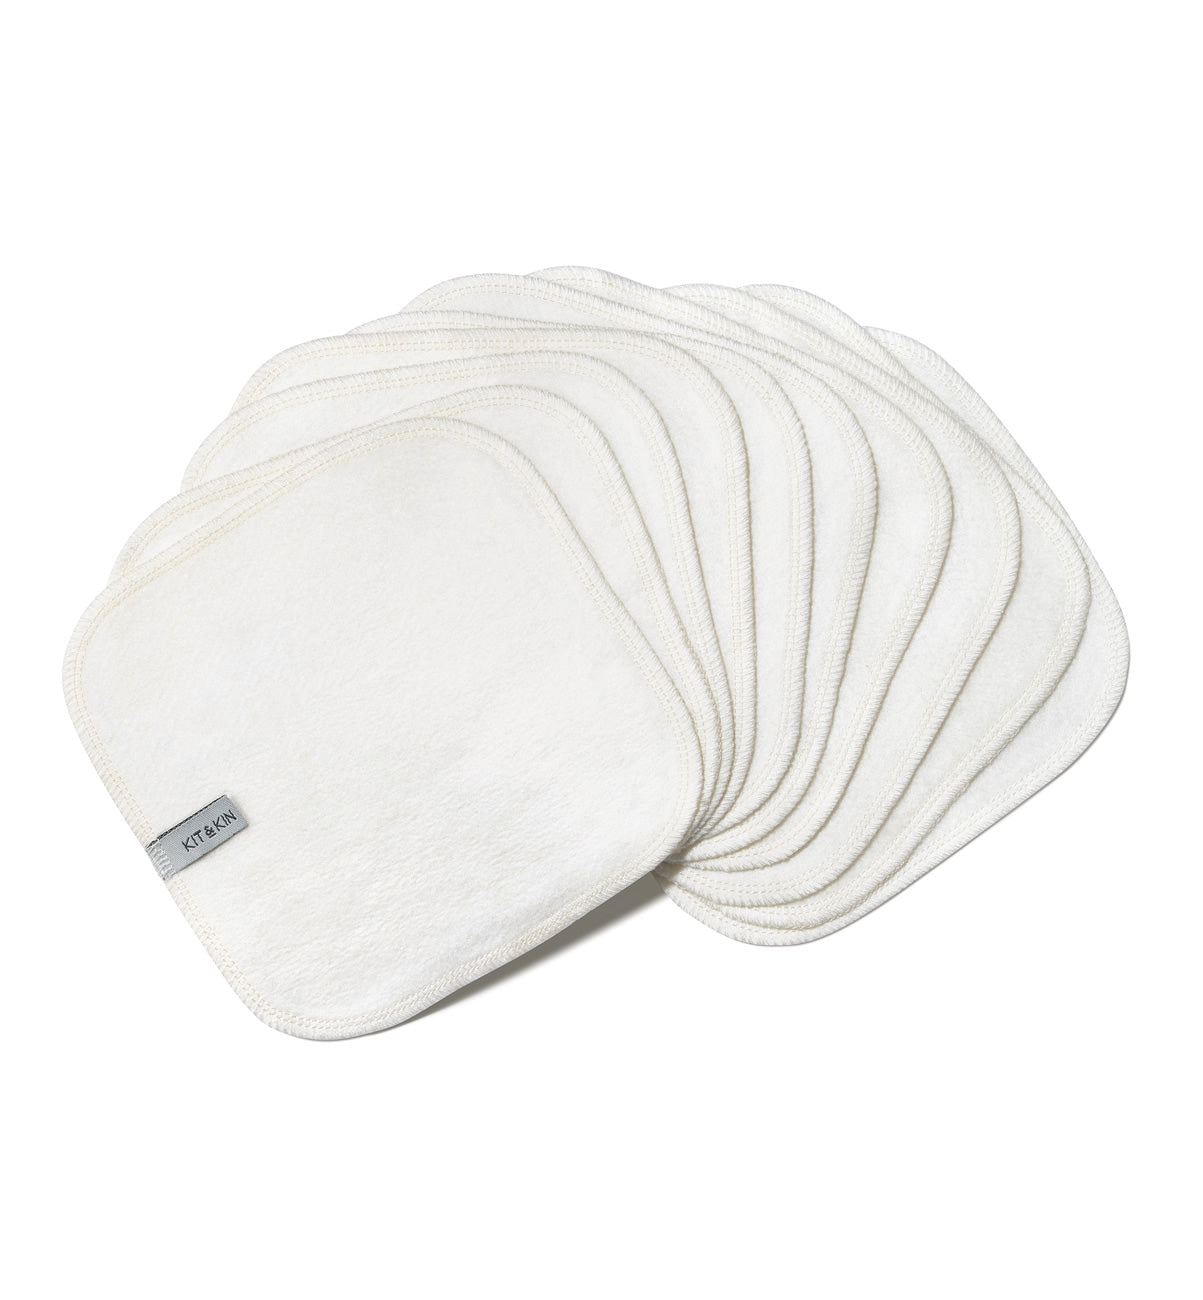 Fanned out reusable baby wipes